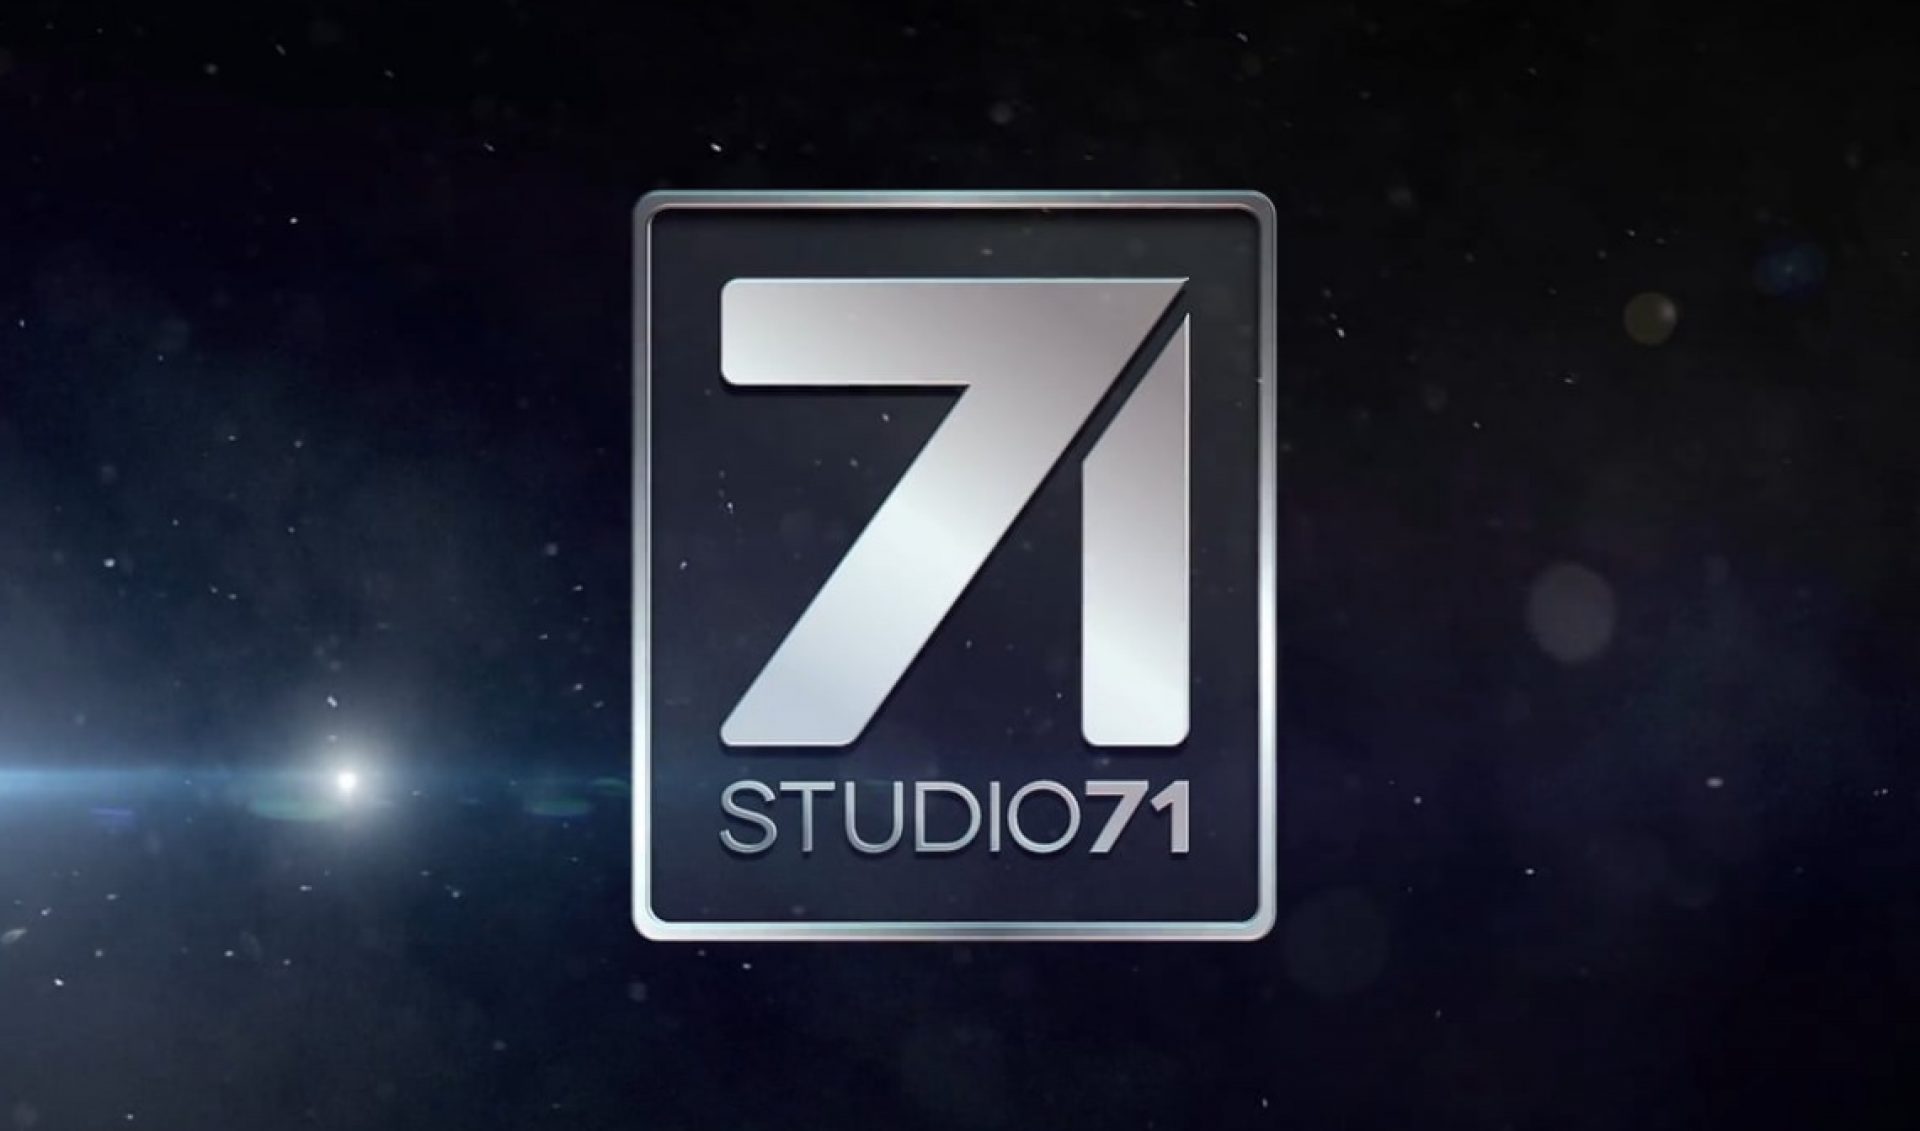 Digital Network Studio71 To Expand To France, Italy Through €53 Million Funding Round